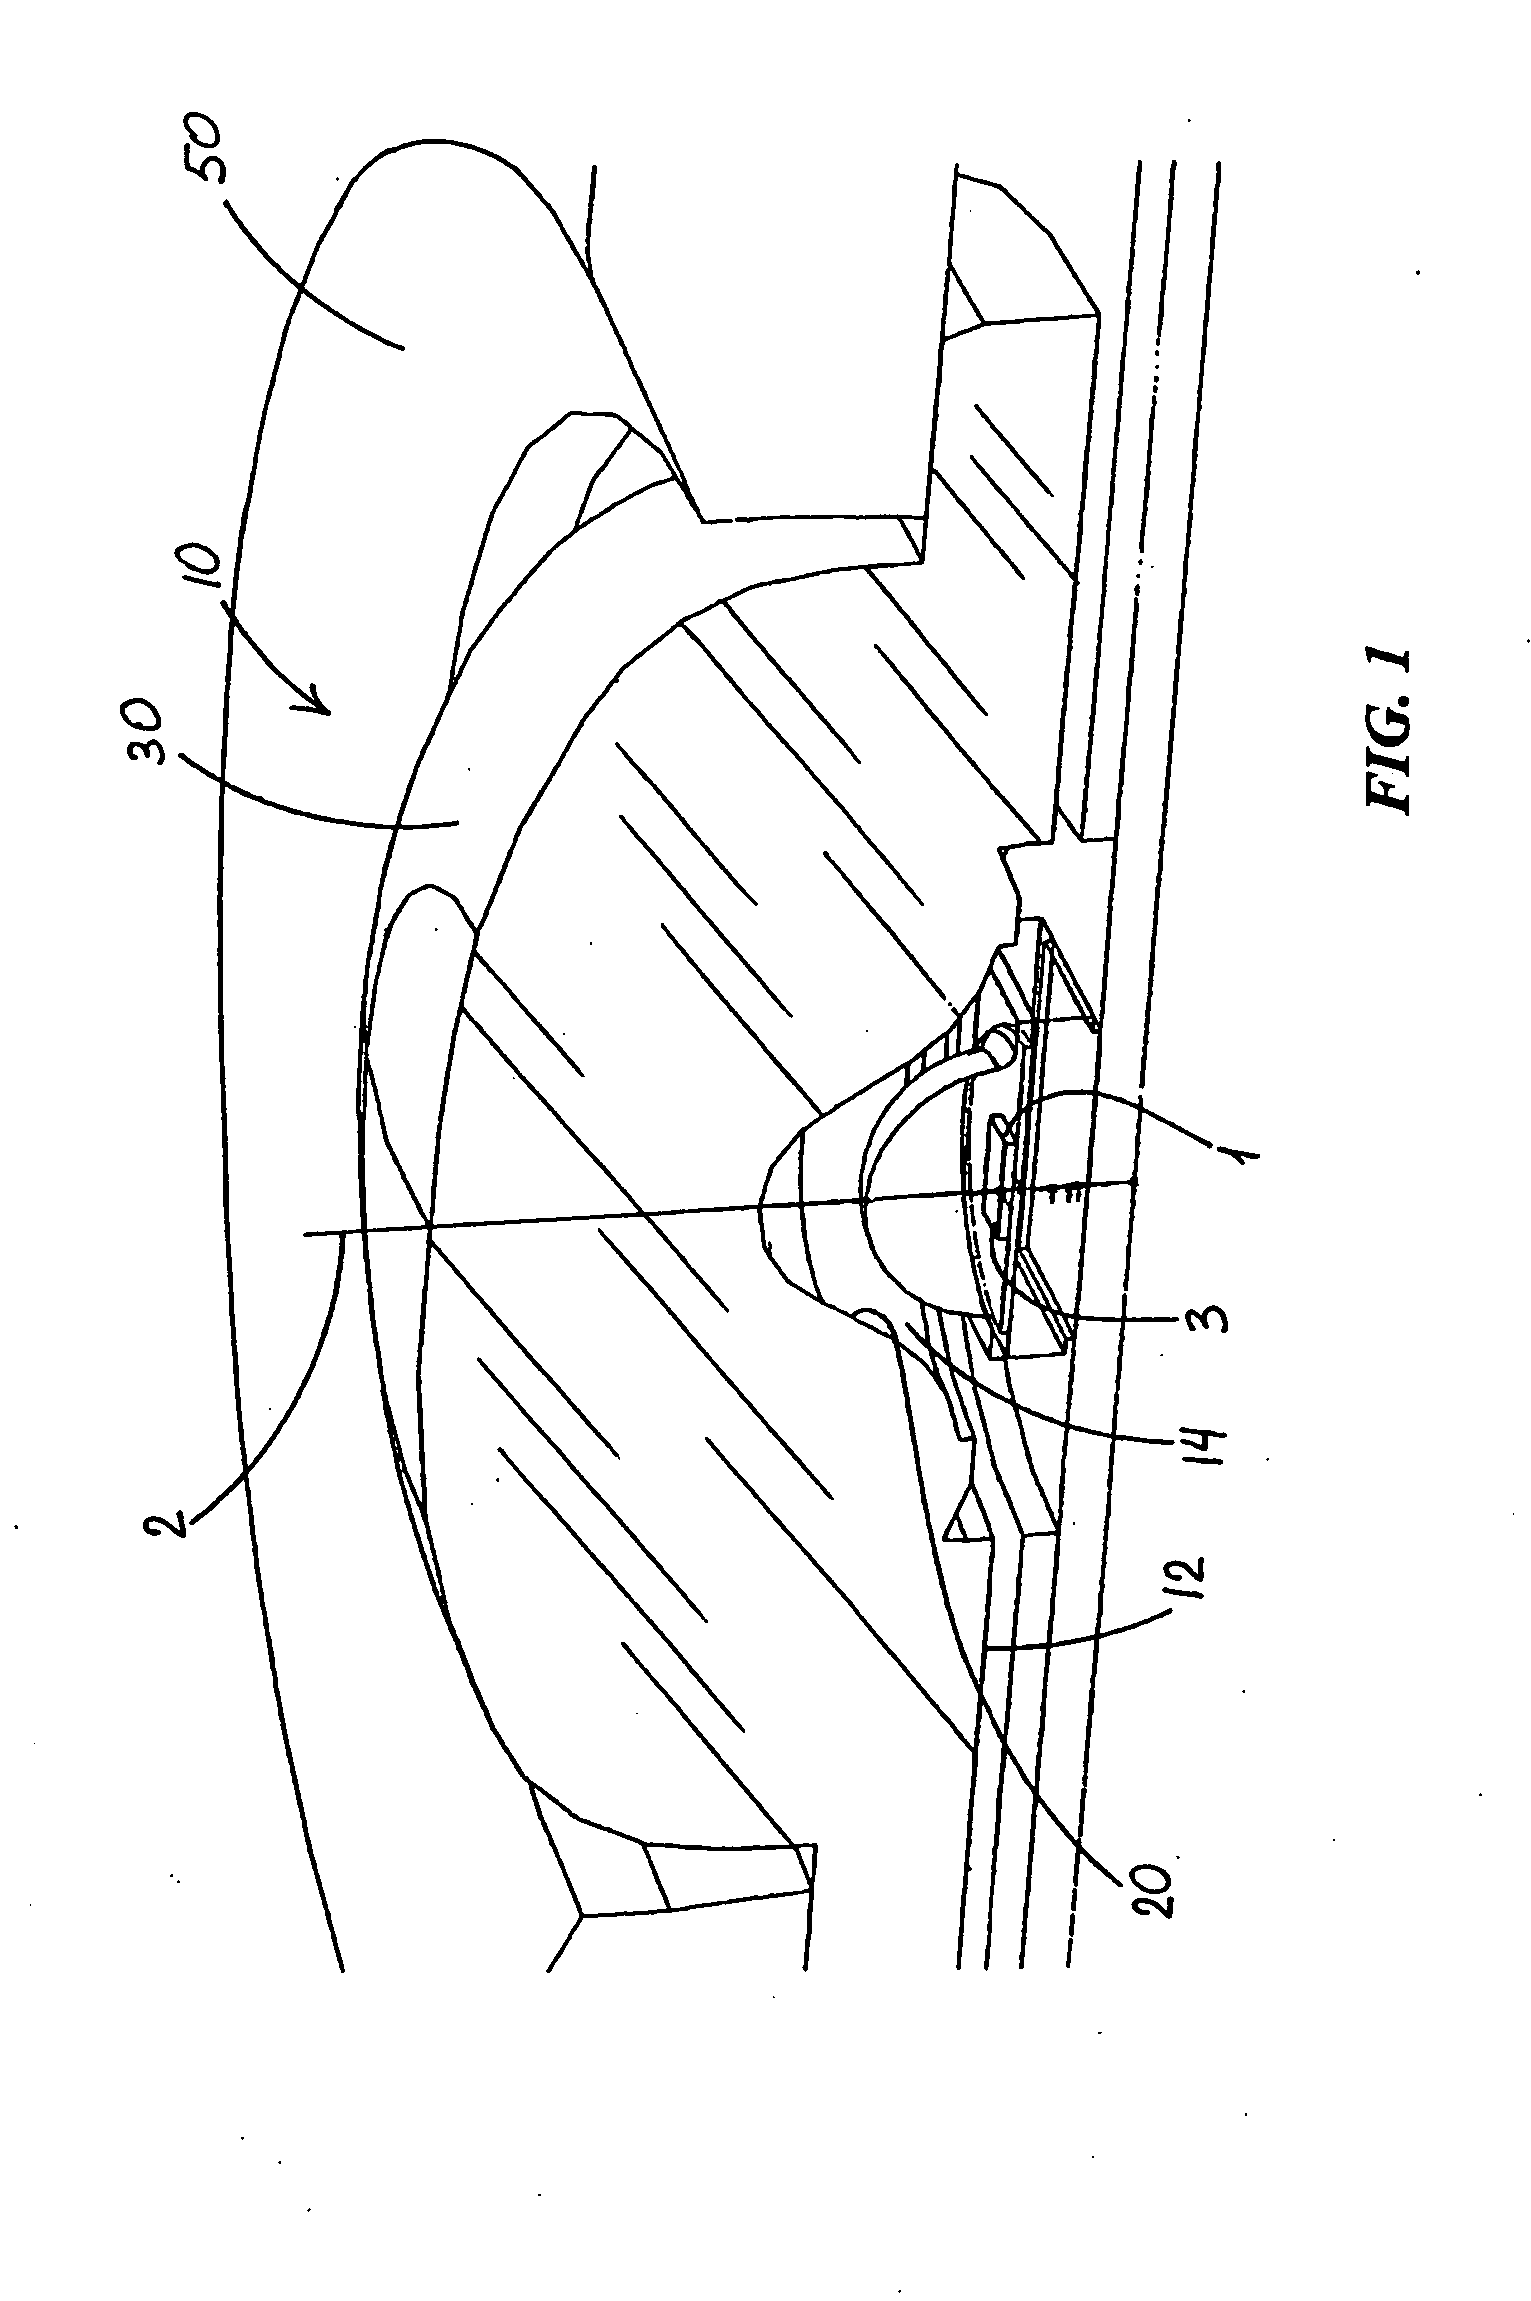 Lens with controlled light refraction